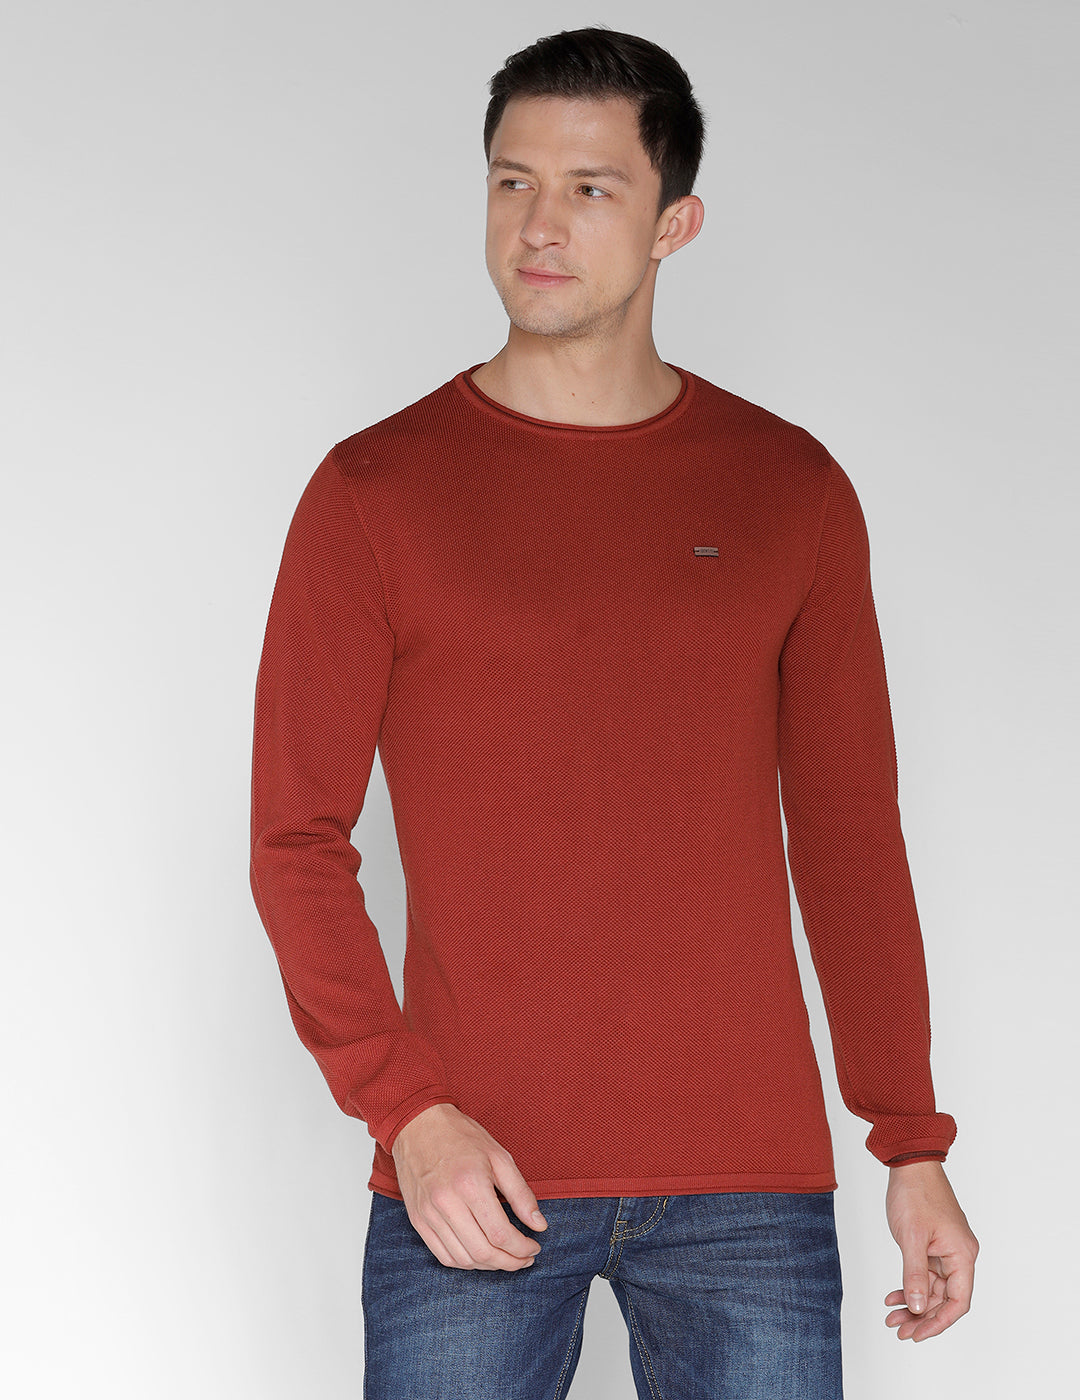 Identiti Full Sleeve Solid Slim Fit Cotton Casual Round Neck T-Shirt For Men